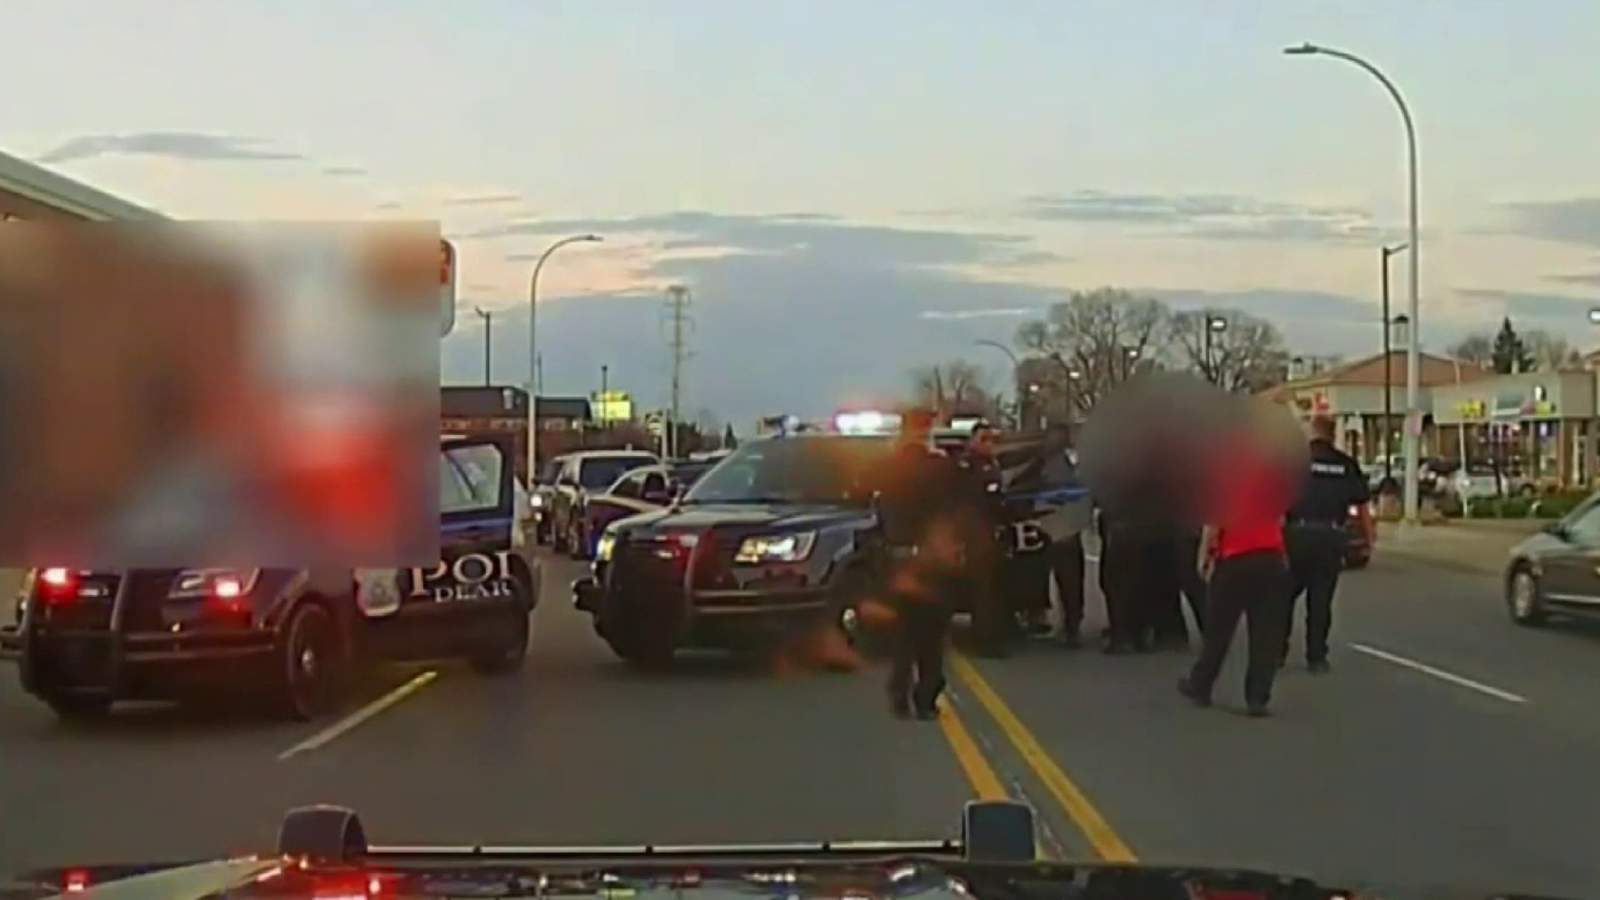 Dearborn police chief says use of force in controversial arrest was justified